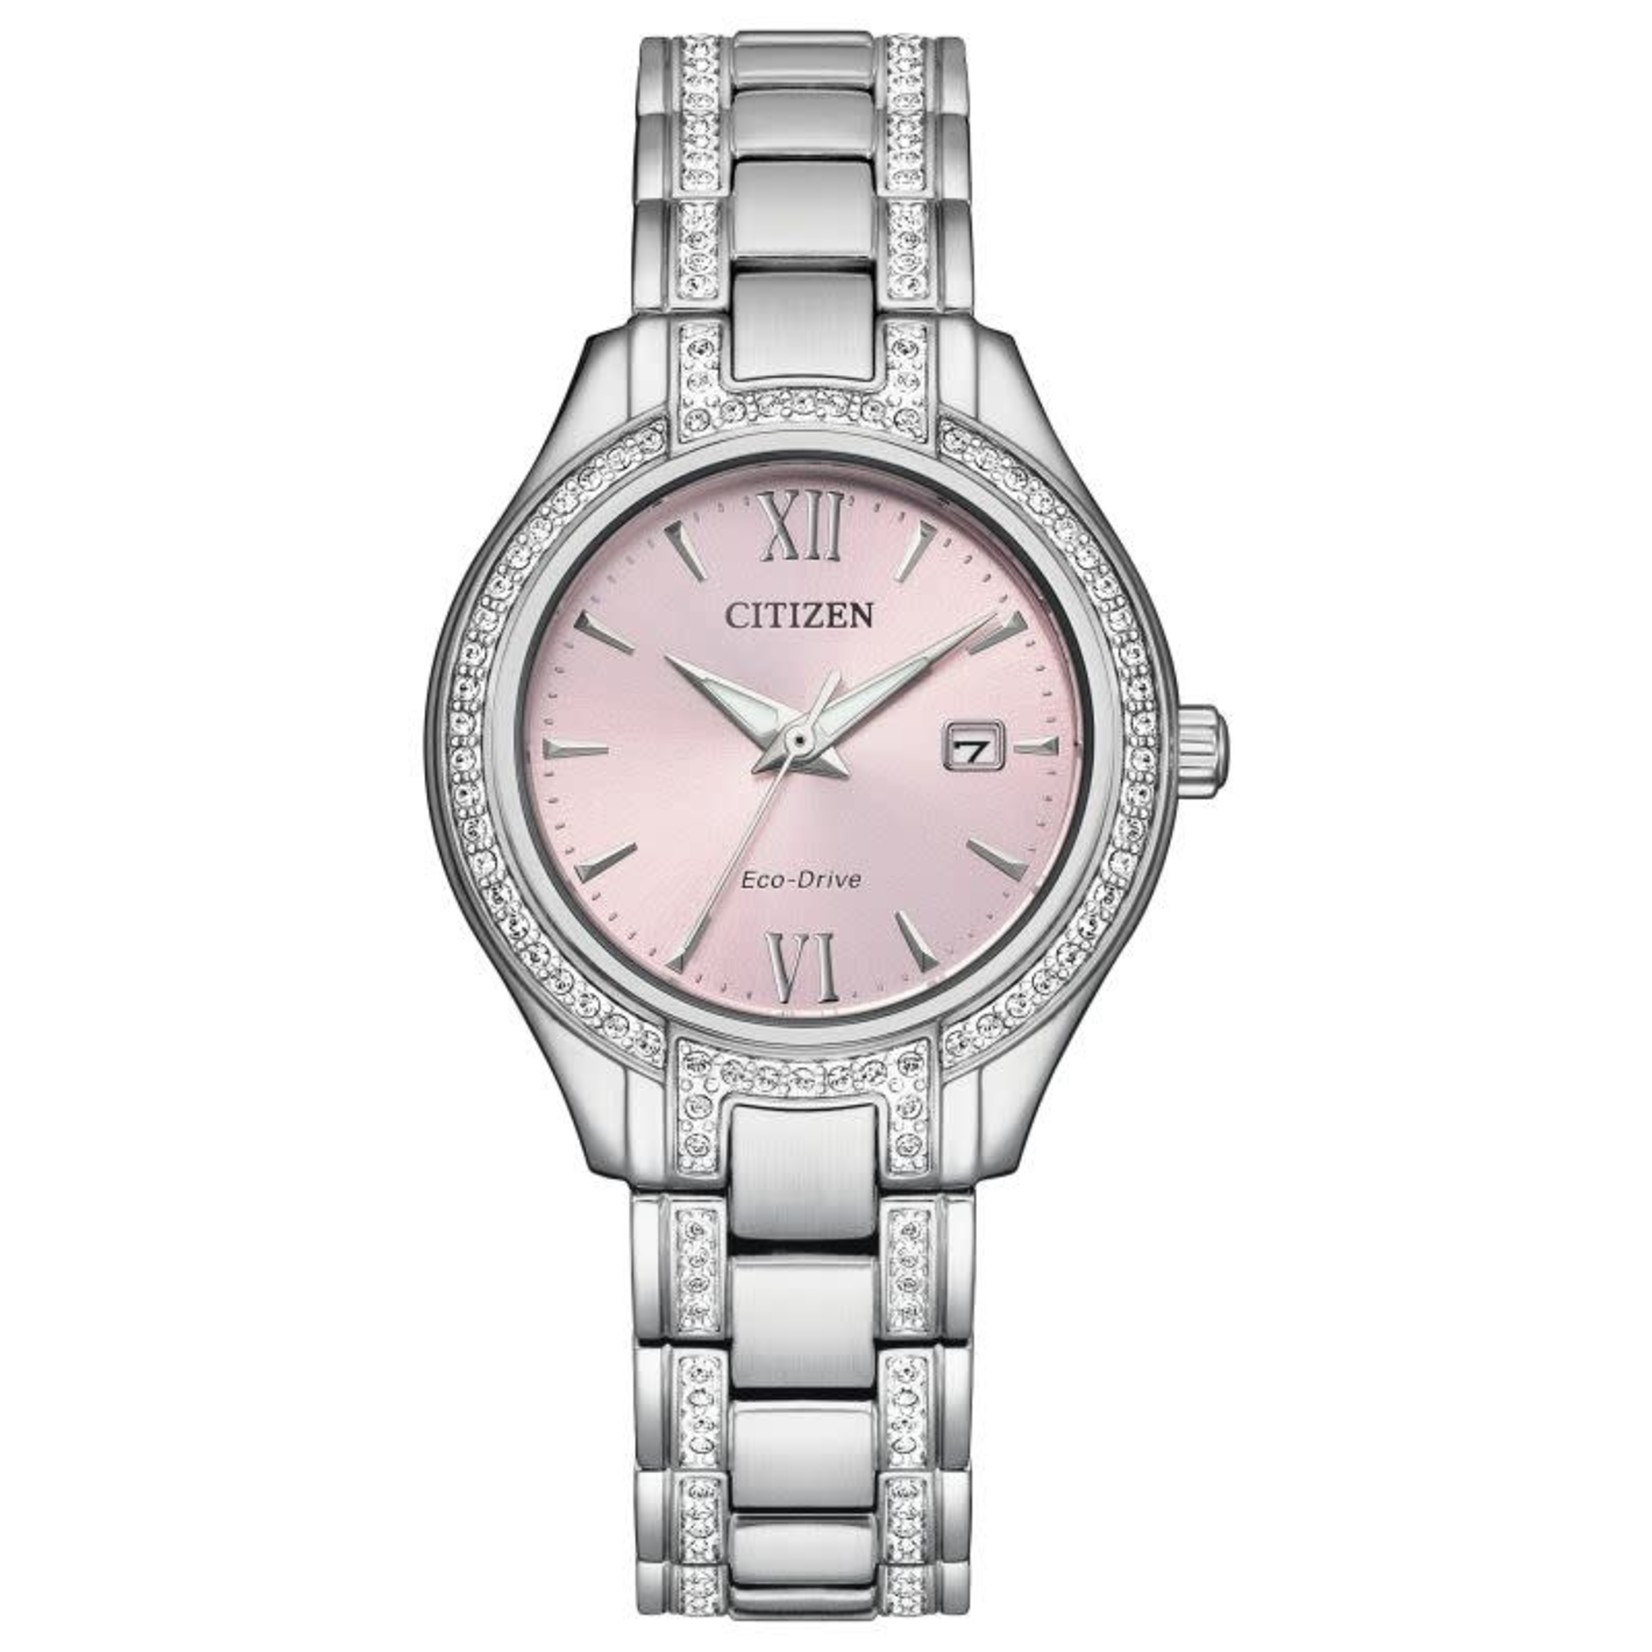 CITIZEN WATCH COMPANY Citizen Eco-Drive Pink Dial Crystal Accents w/Date